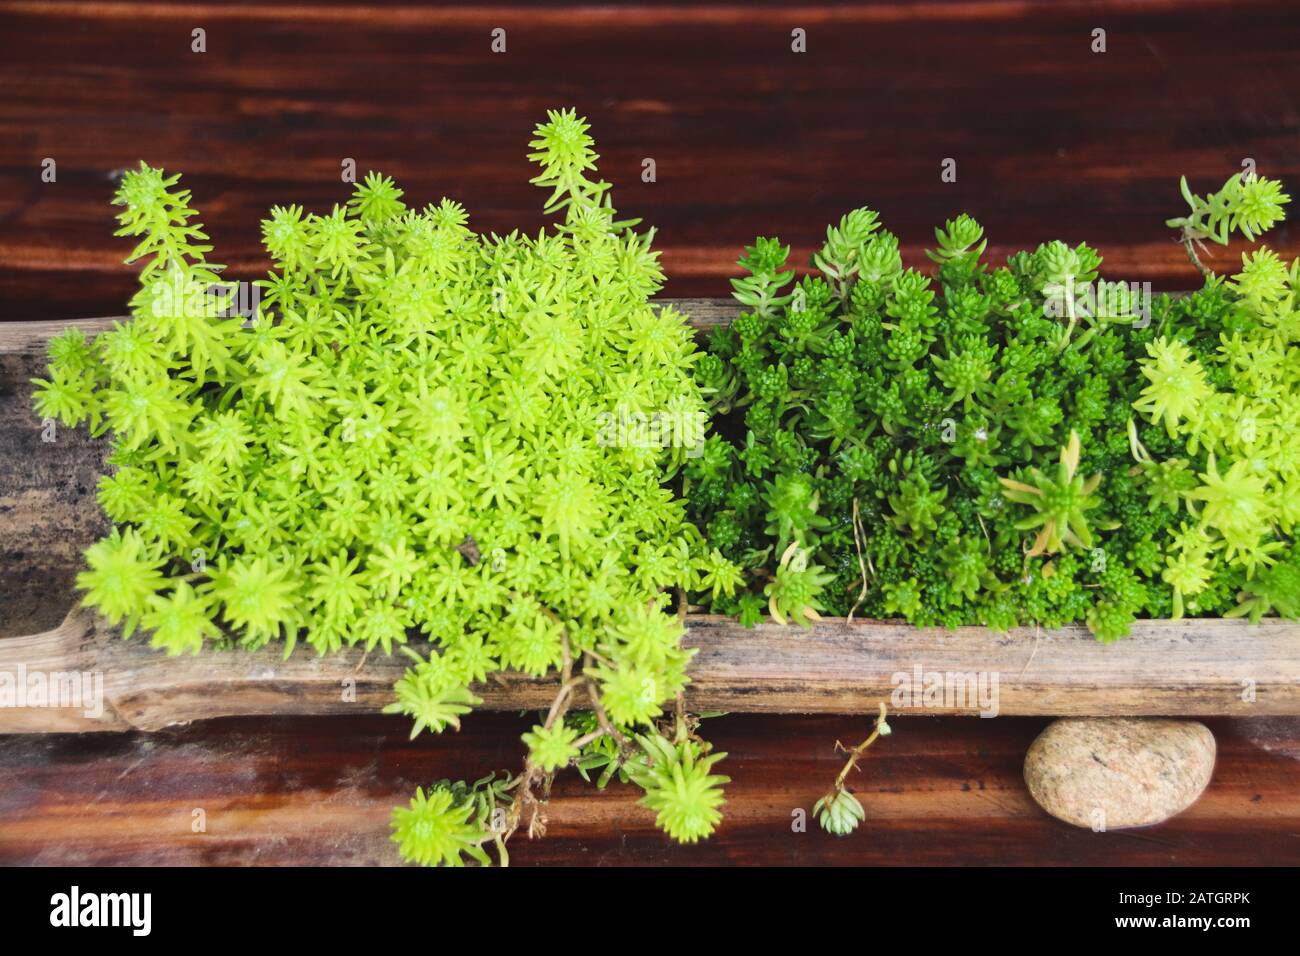 Succulent green creeping sedum known as stonecrops as a micro greenery in the home for a Spring theme decoration Stock Photo